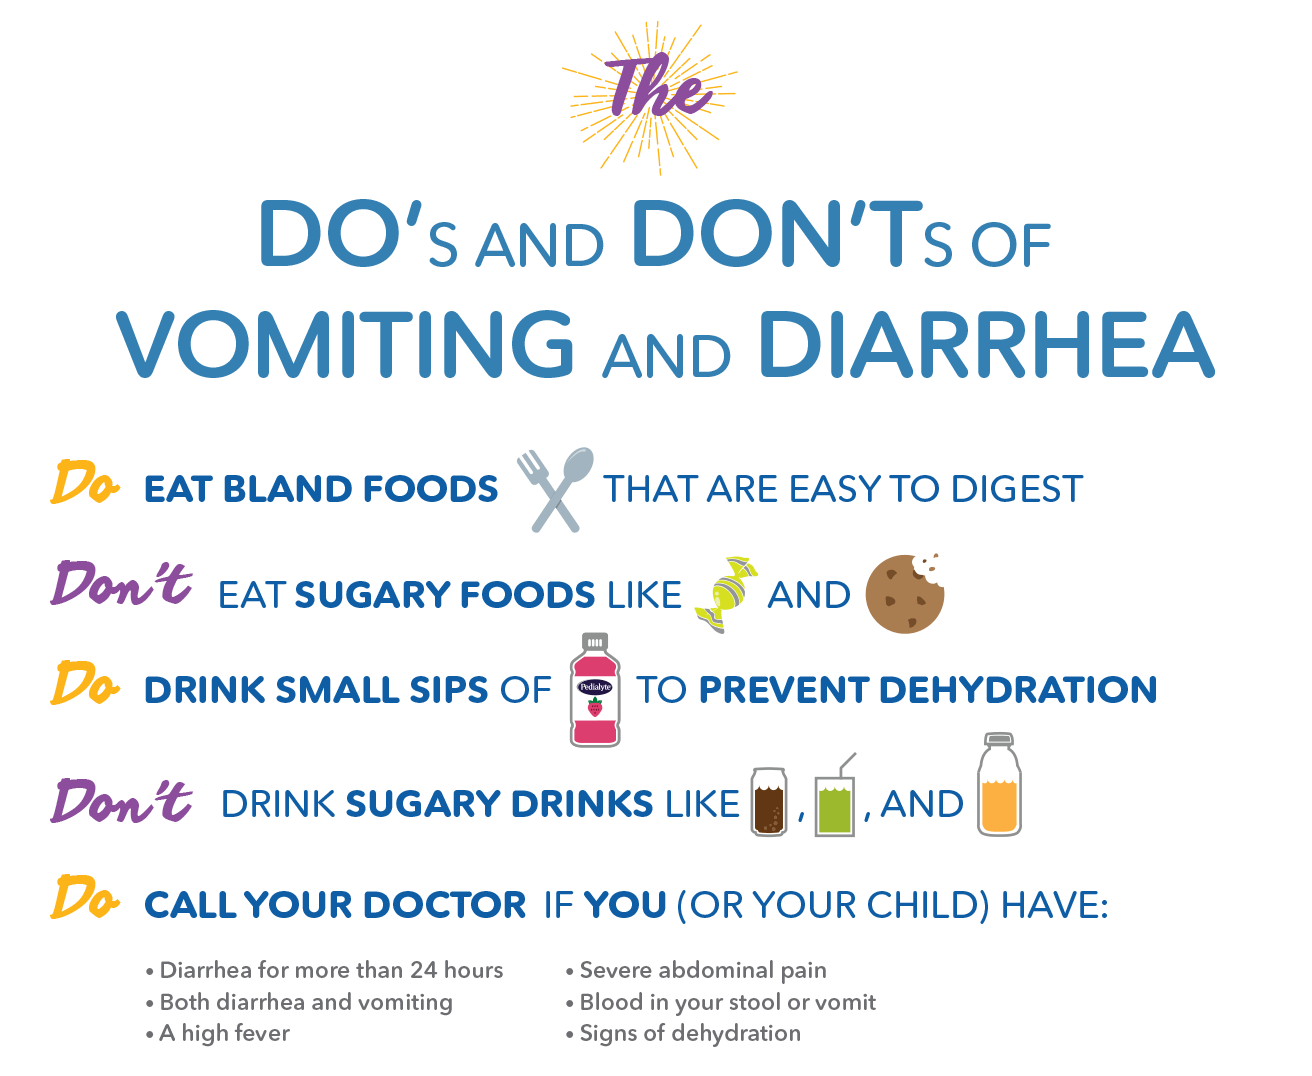 The do's and don'ts of vomiting and diarrhea, Pedialyte® can help